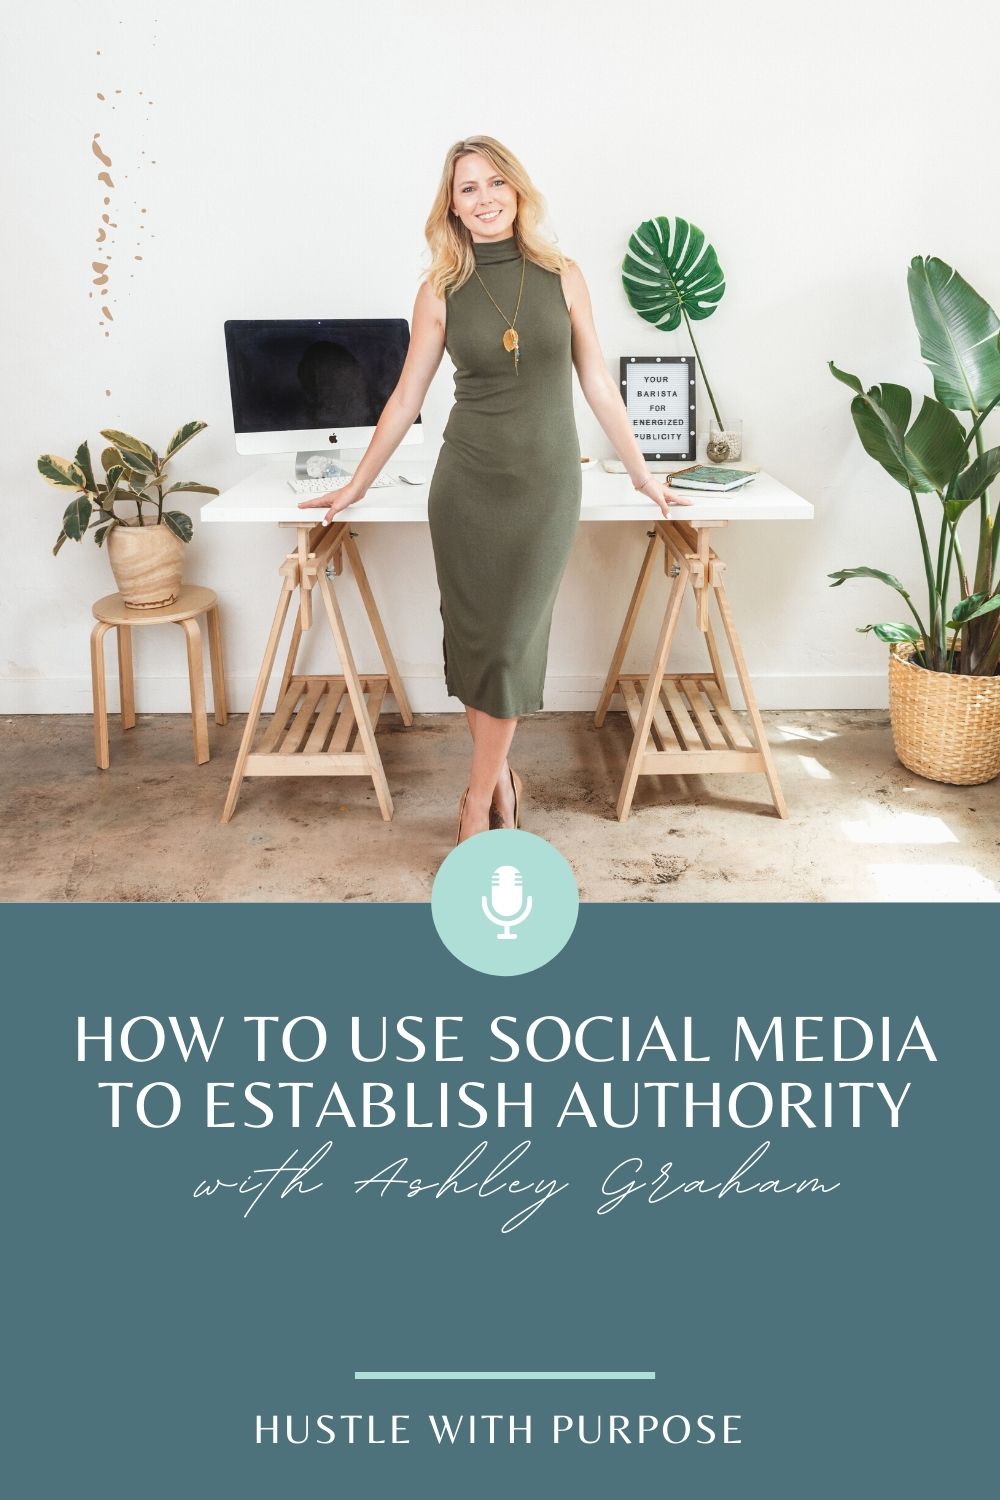 How to Use Social Media to Establish Authority with Ashley Graham 2